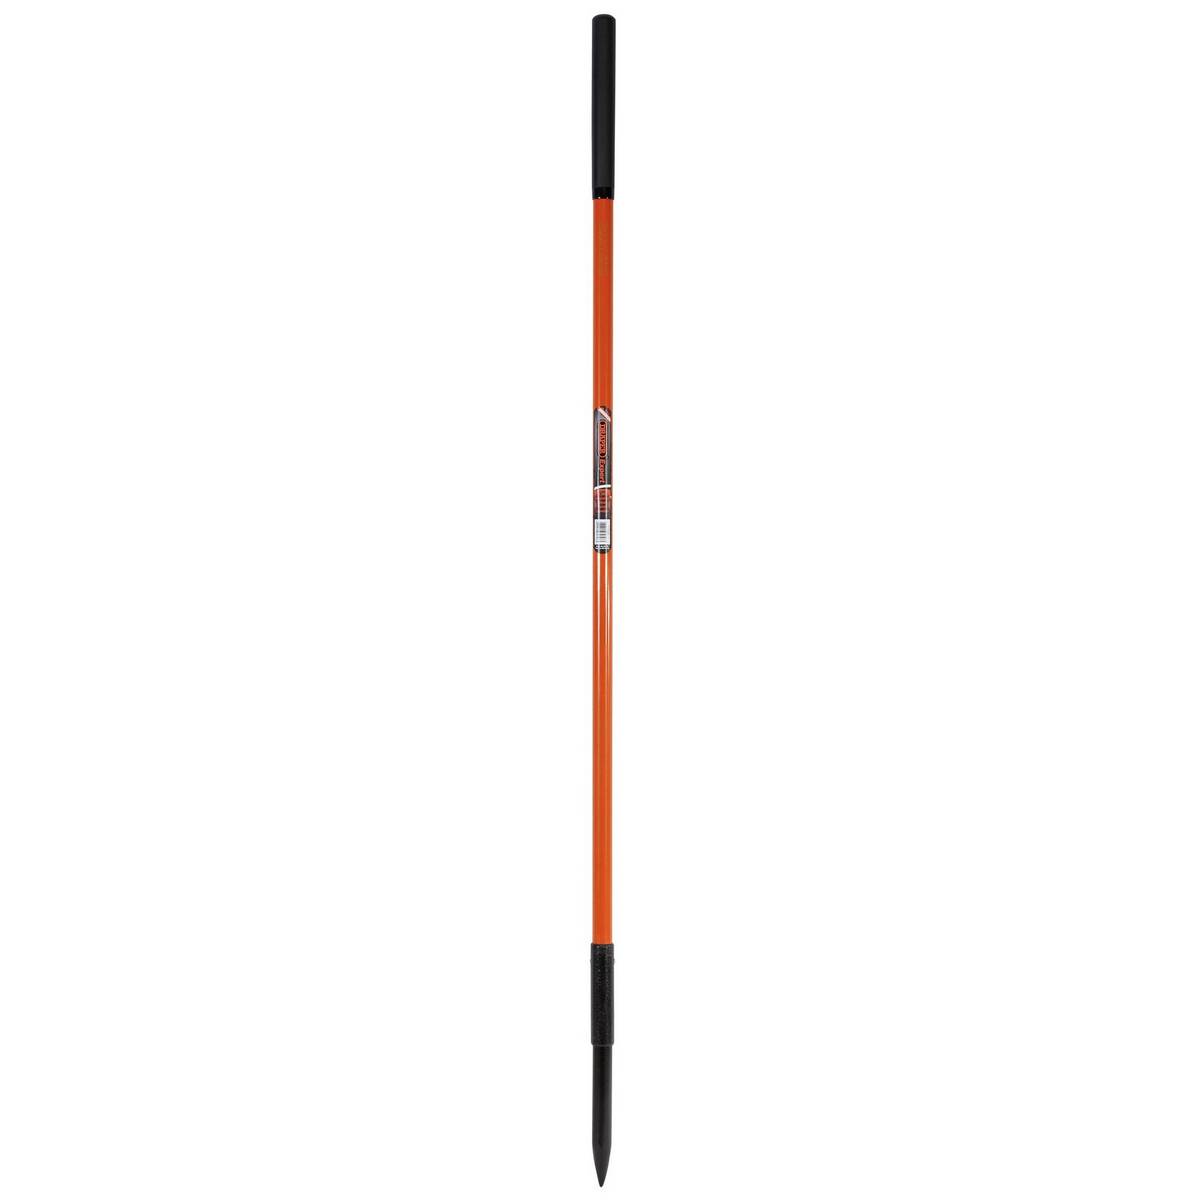 DRAPER EXPERT FULLY INSULATED CONTRACTORS POINT END CROWBAR